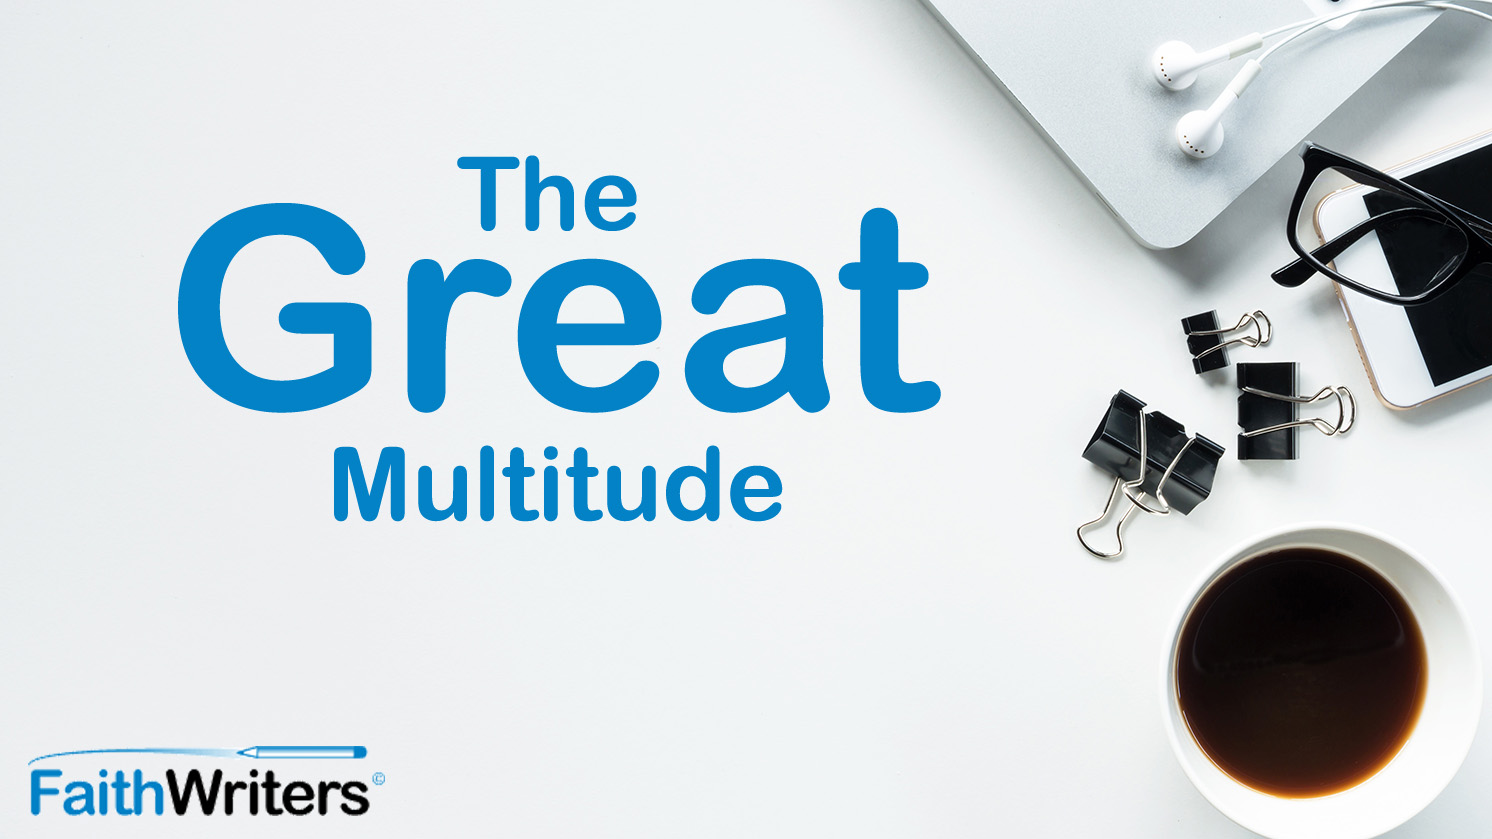 The Great Multitude